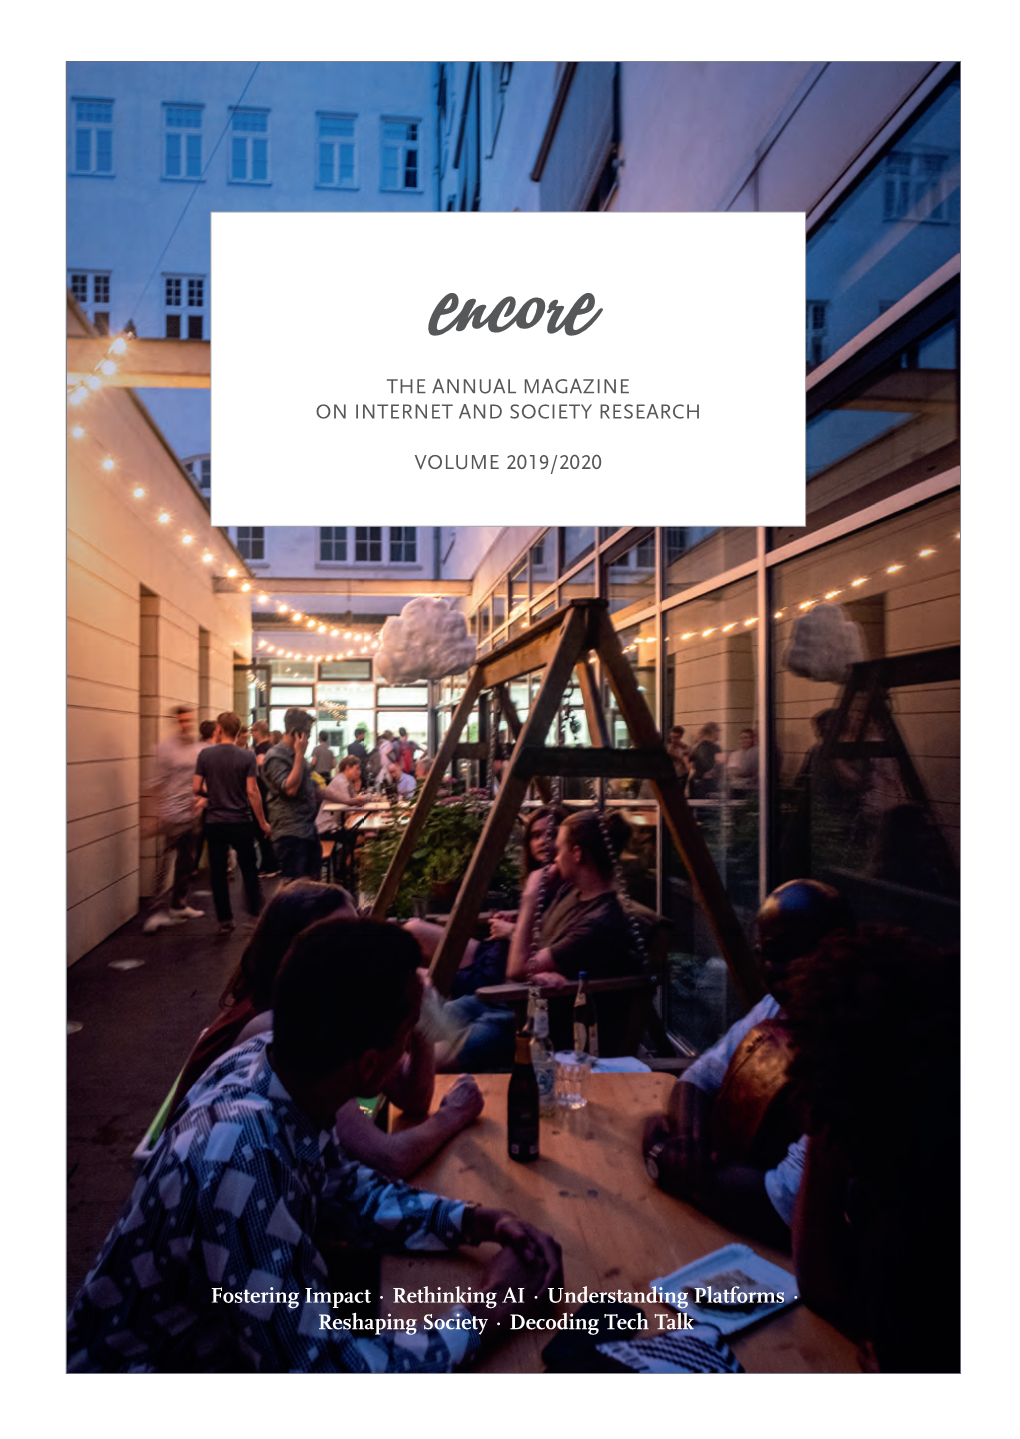 Encore the ANNUAL MAGAZINE on INTERNET and SOCIETY RESEARCH